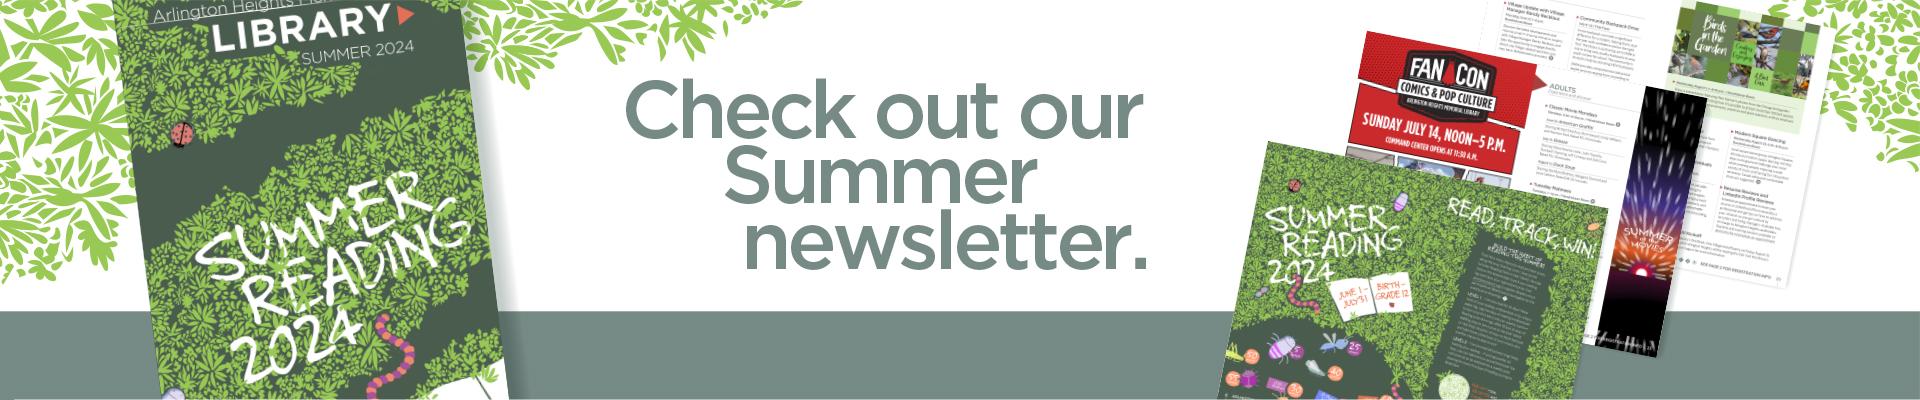 Check out our Summer newsletter